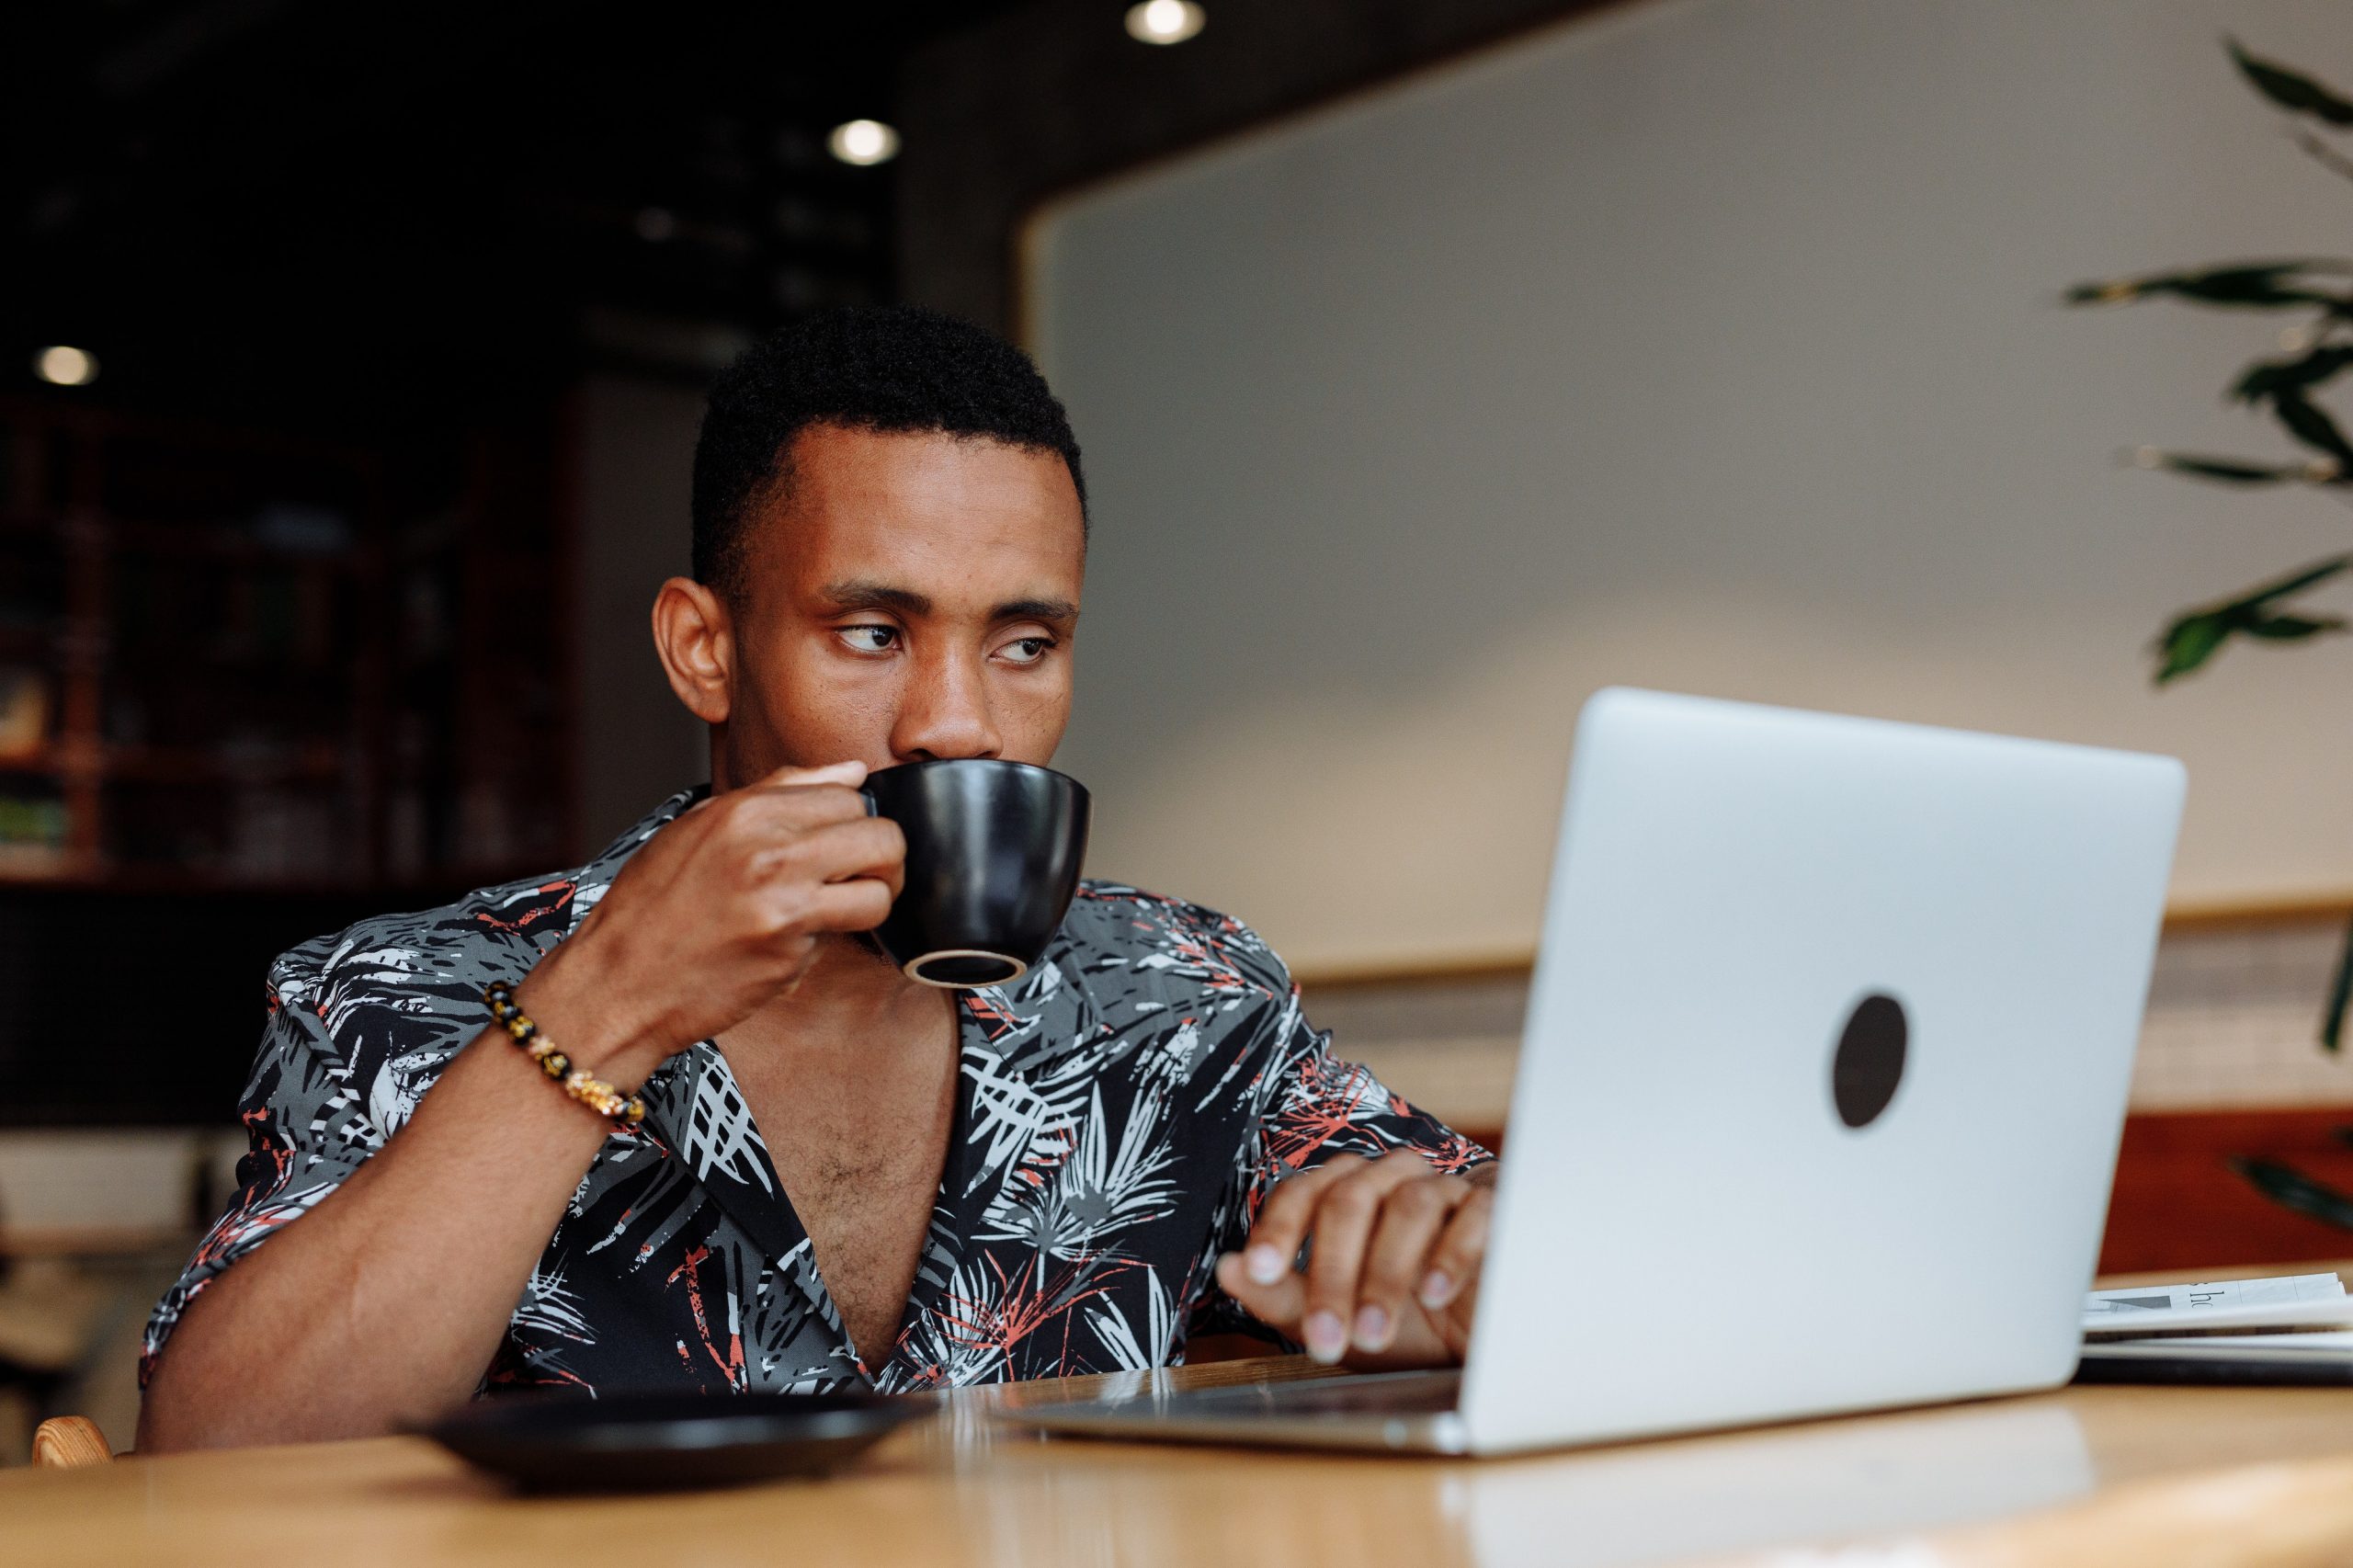 A man sits at a wooden desk and works on his laptop while sipping coffee from a mug.